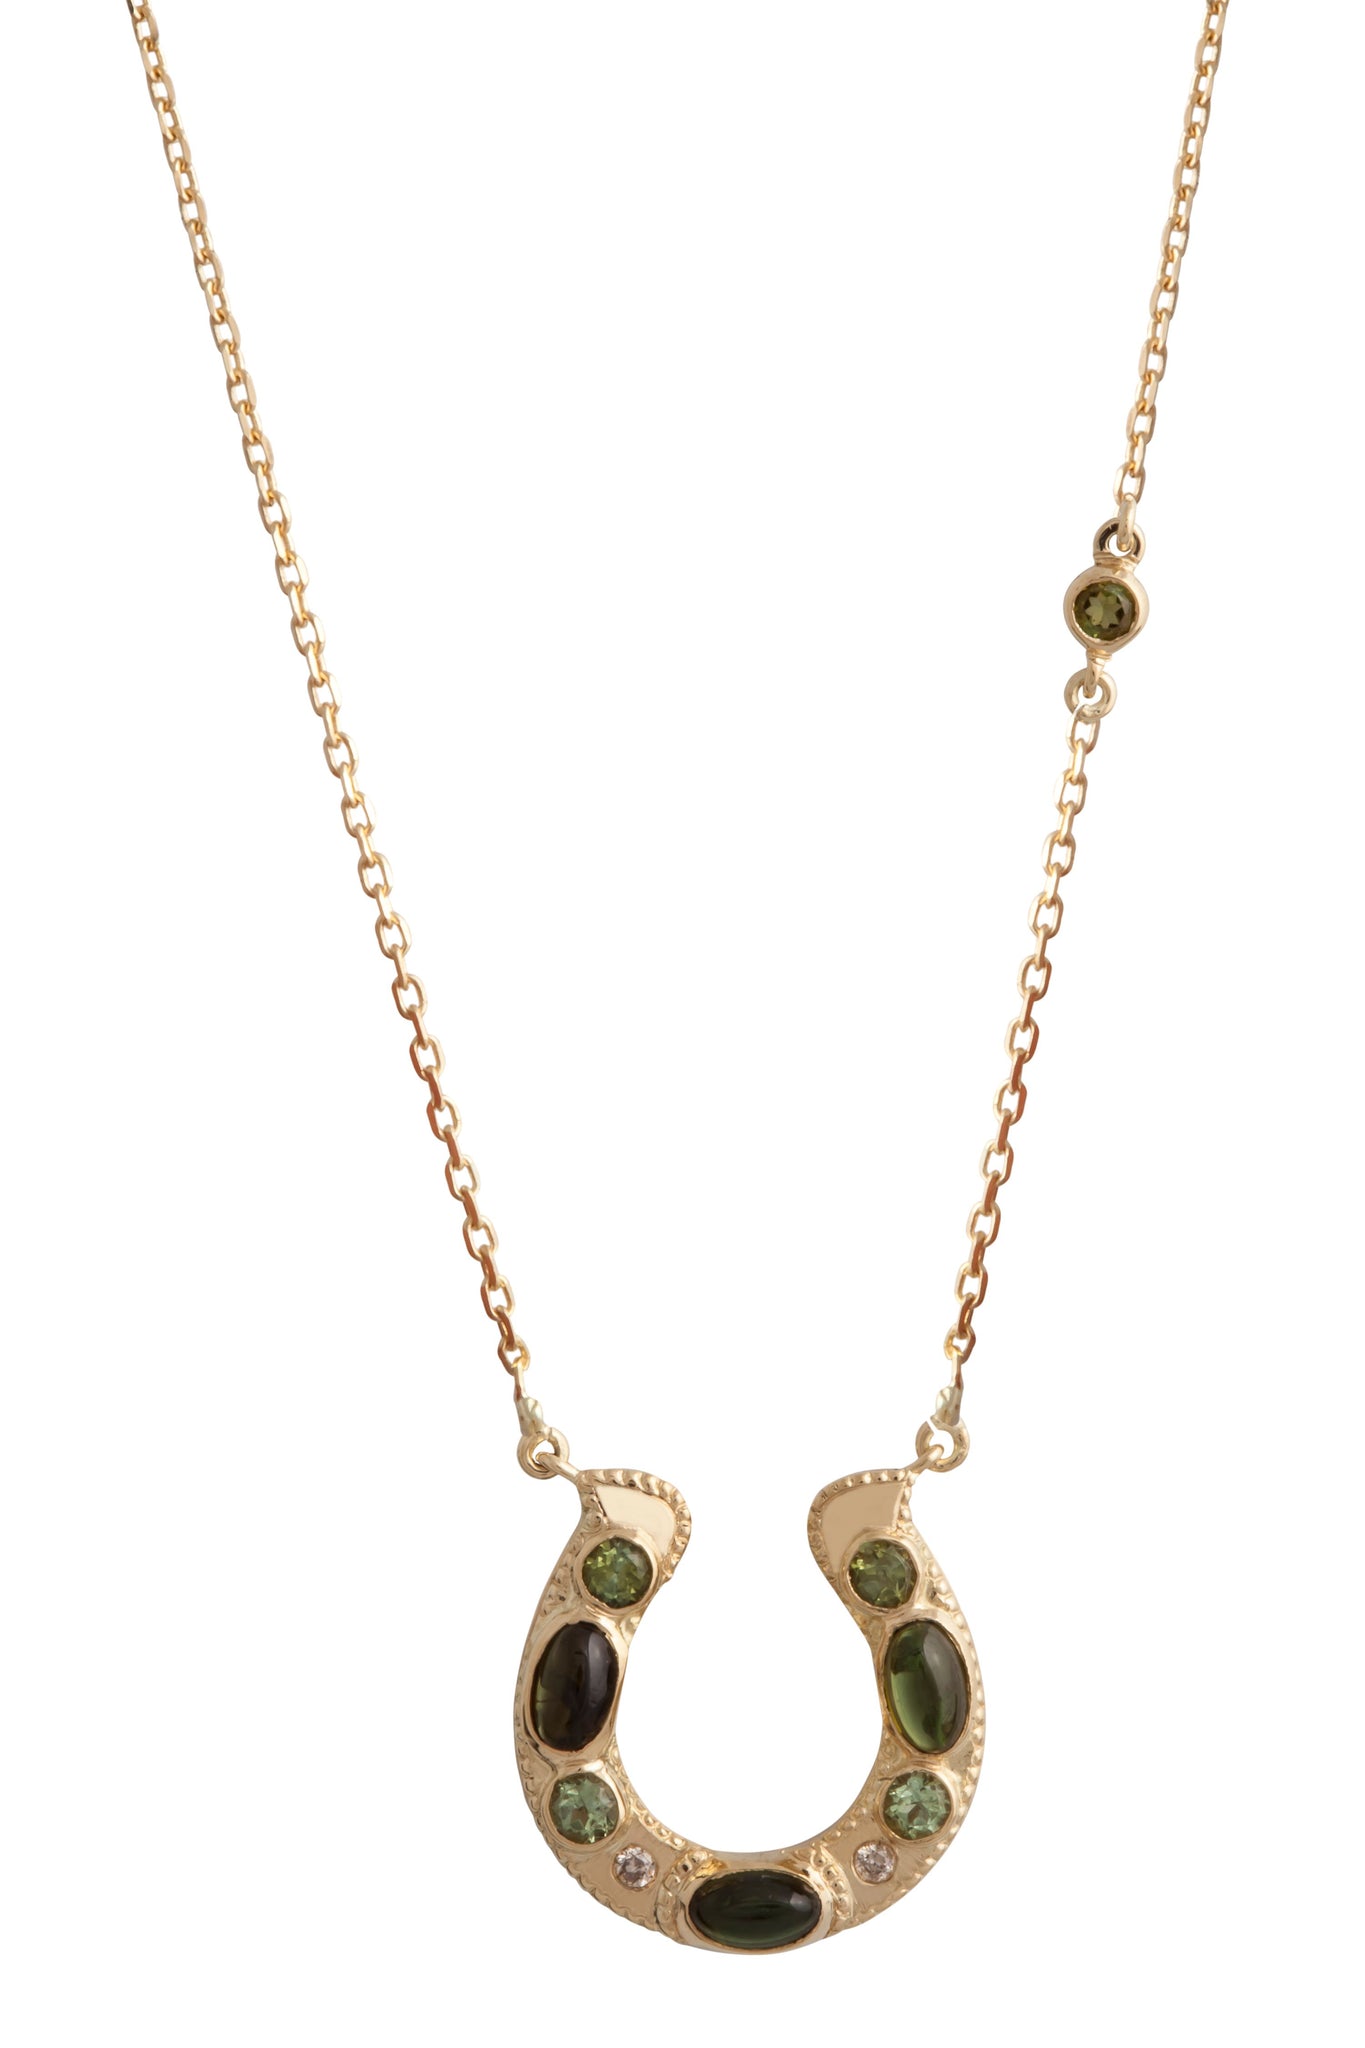 Horseshoe Necklace with Green Tourmaline Cabochon and Diamonds